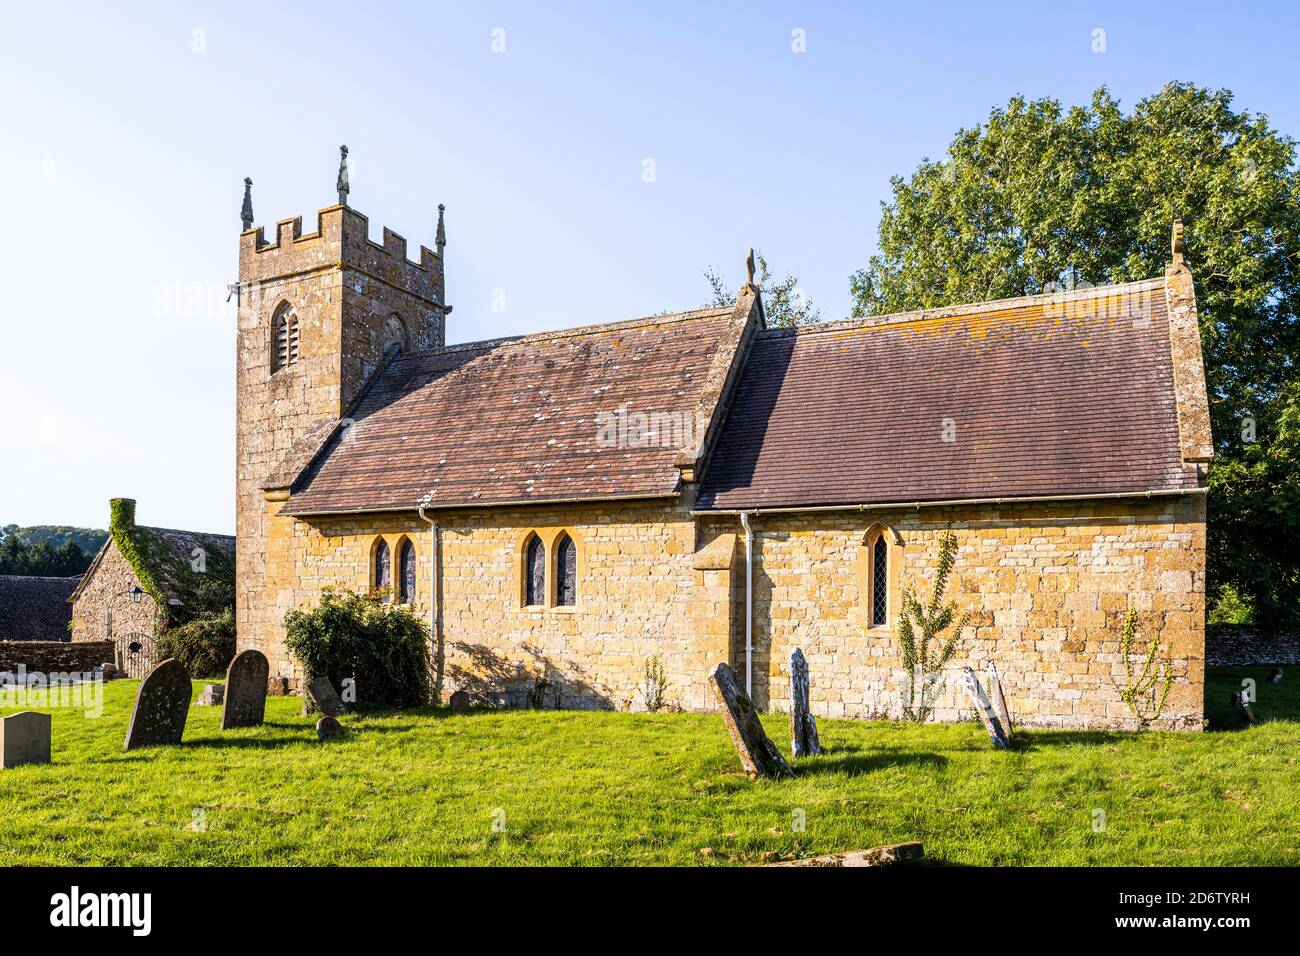 Evening light on the church of St James in the Cotswold village of Cutsdean, Gloucestershire UK - The tower is probably 14th century. Stock Photo